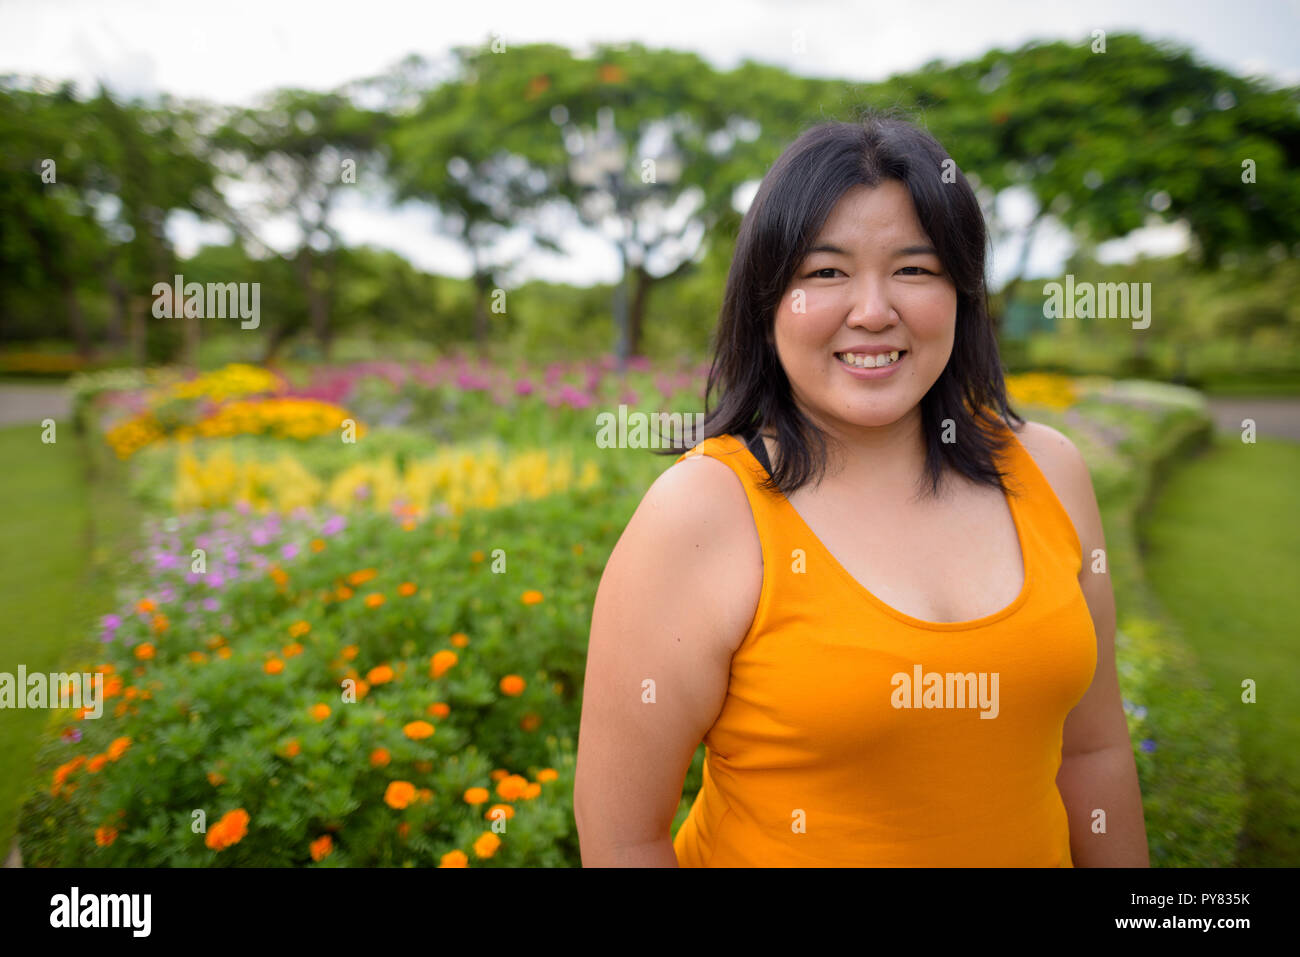 Beautiful overweight Asian woman smiling in park Stock Photo